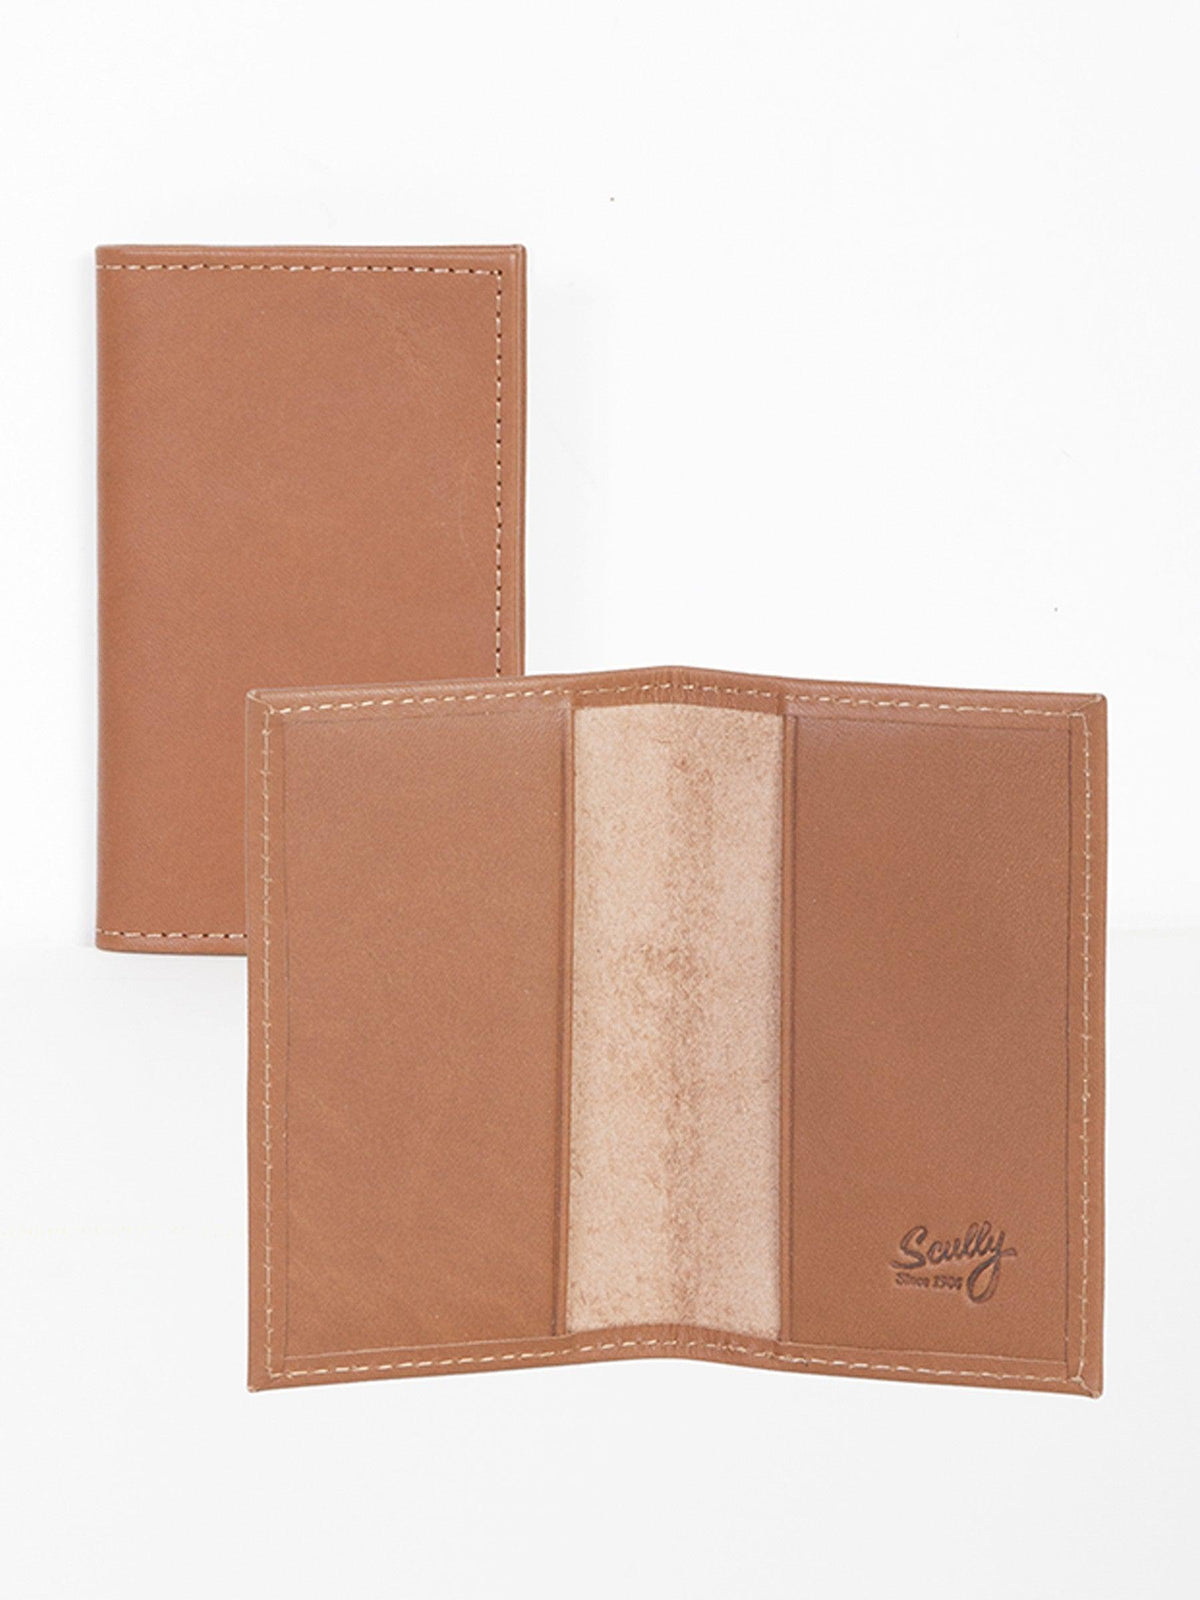 Scully Leather business card case - Flyclothing LLC